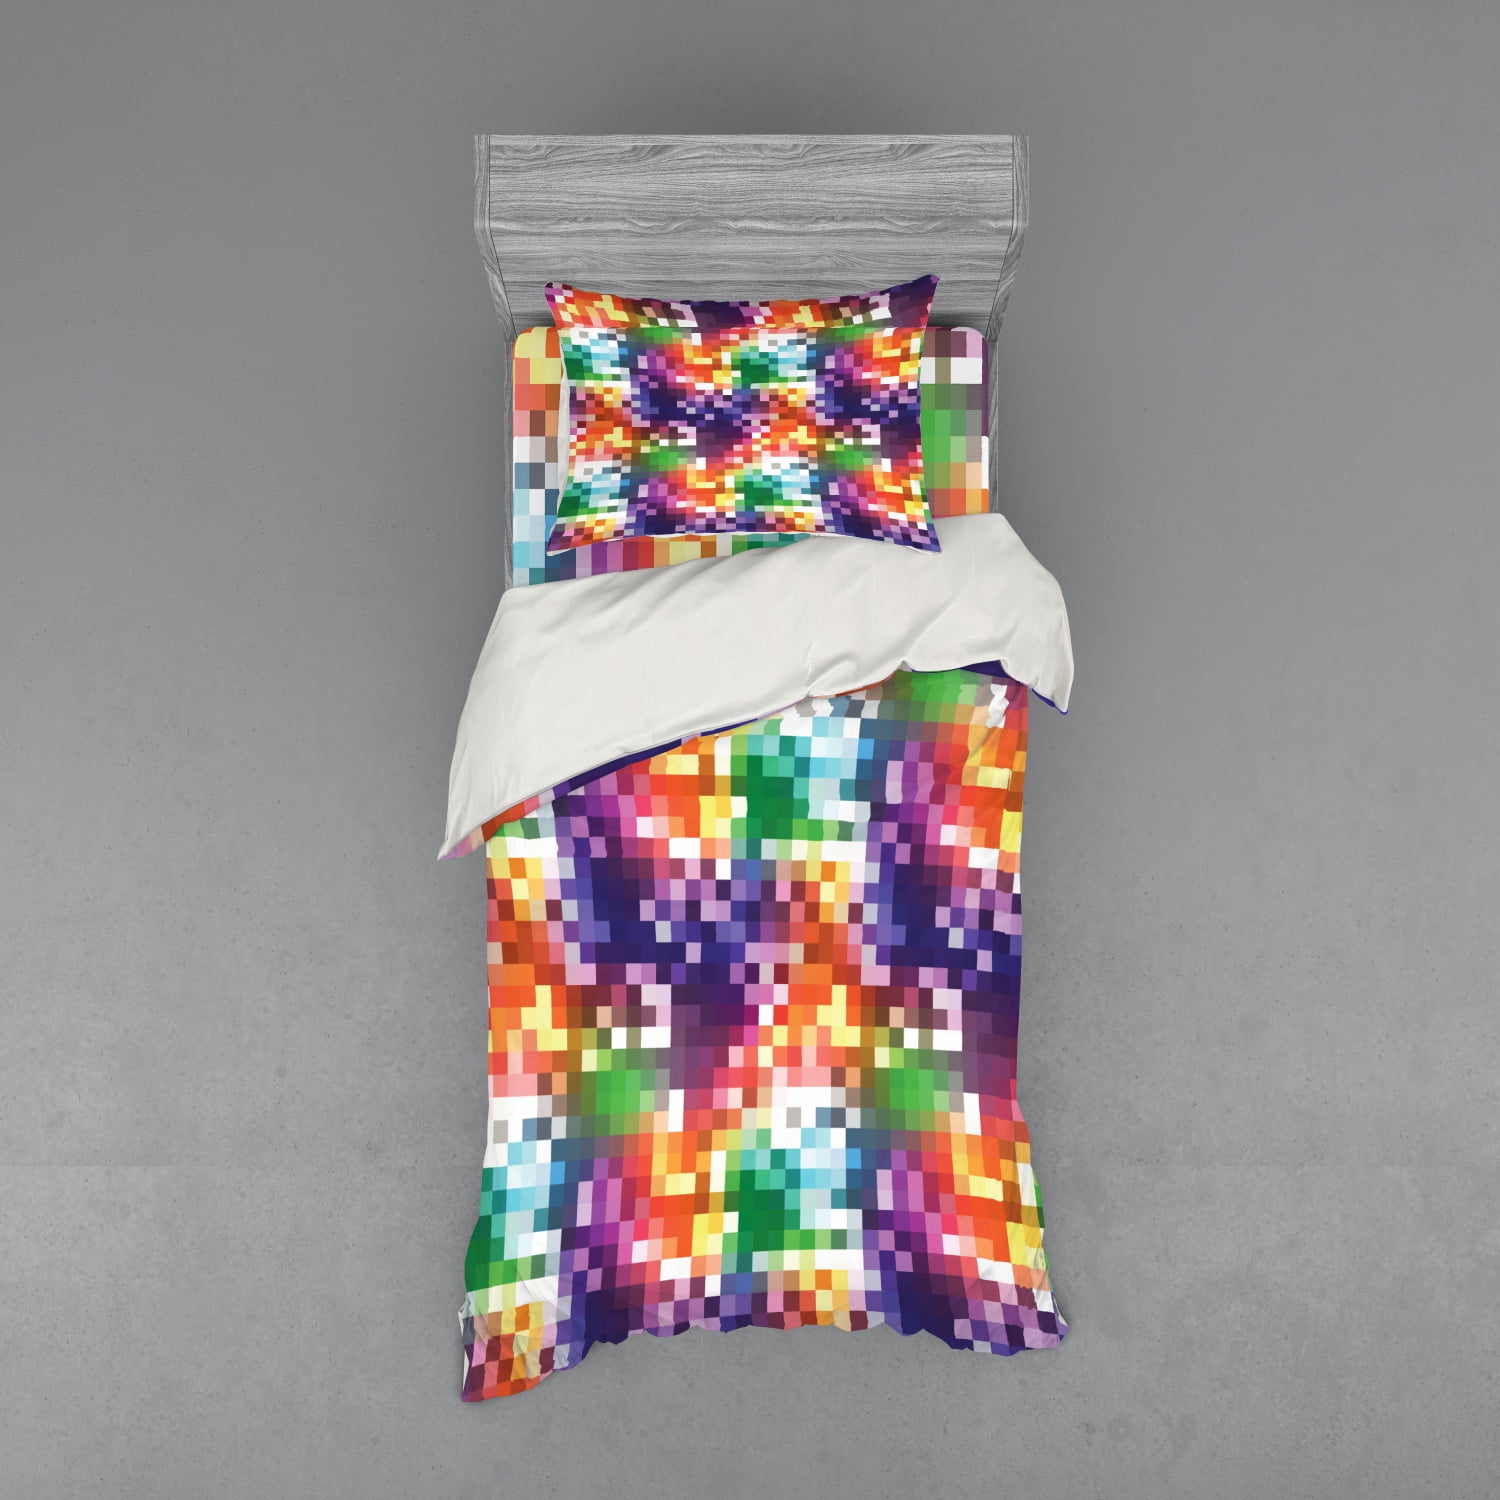 Pixel Details Rainbow Print Details about  / Abstract Quilted Coverlet /& Pillow Shams Set